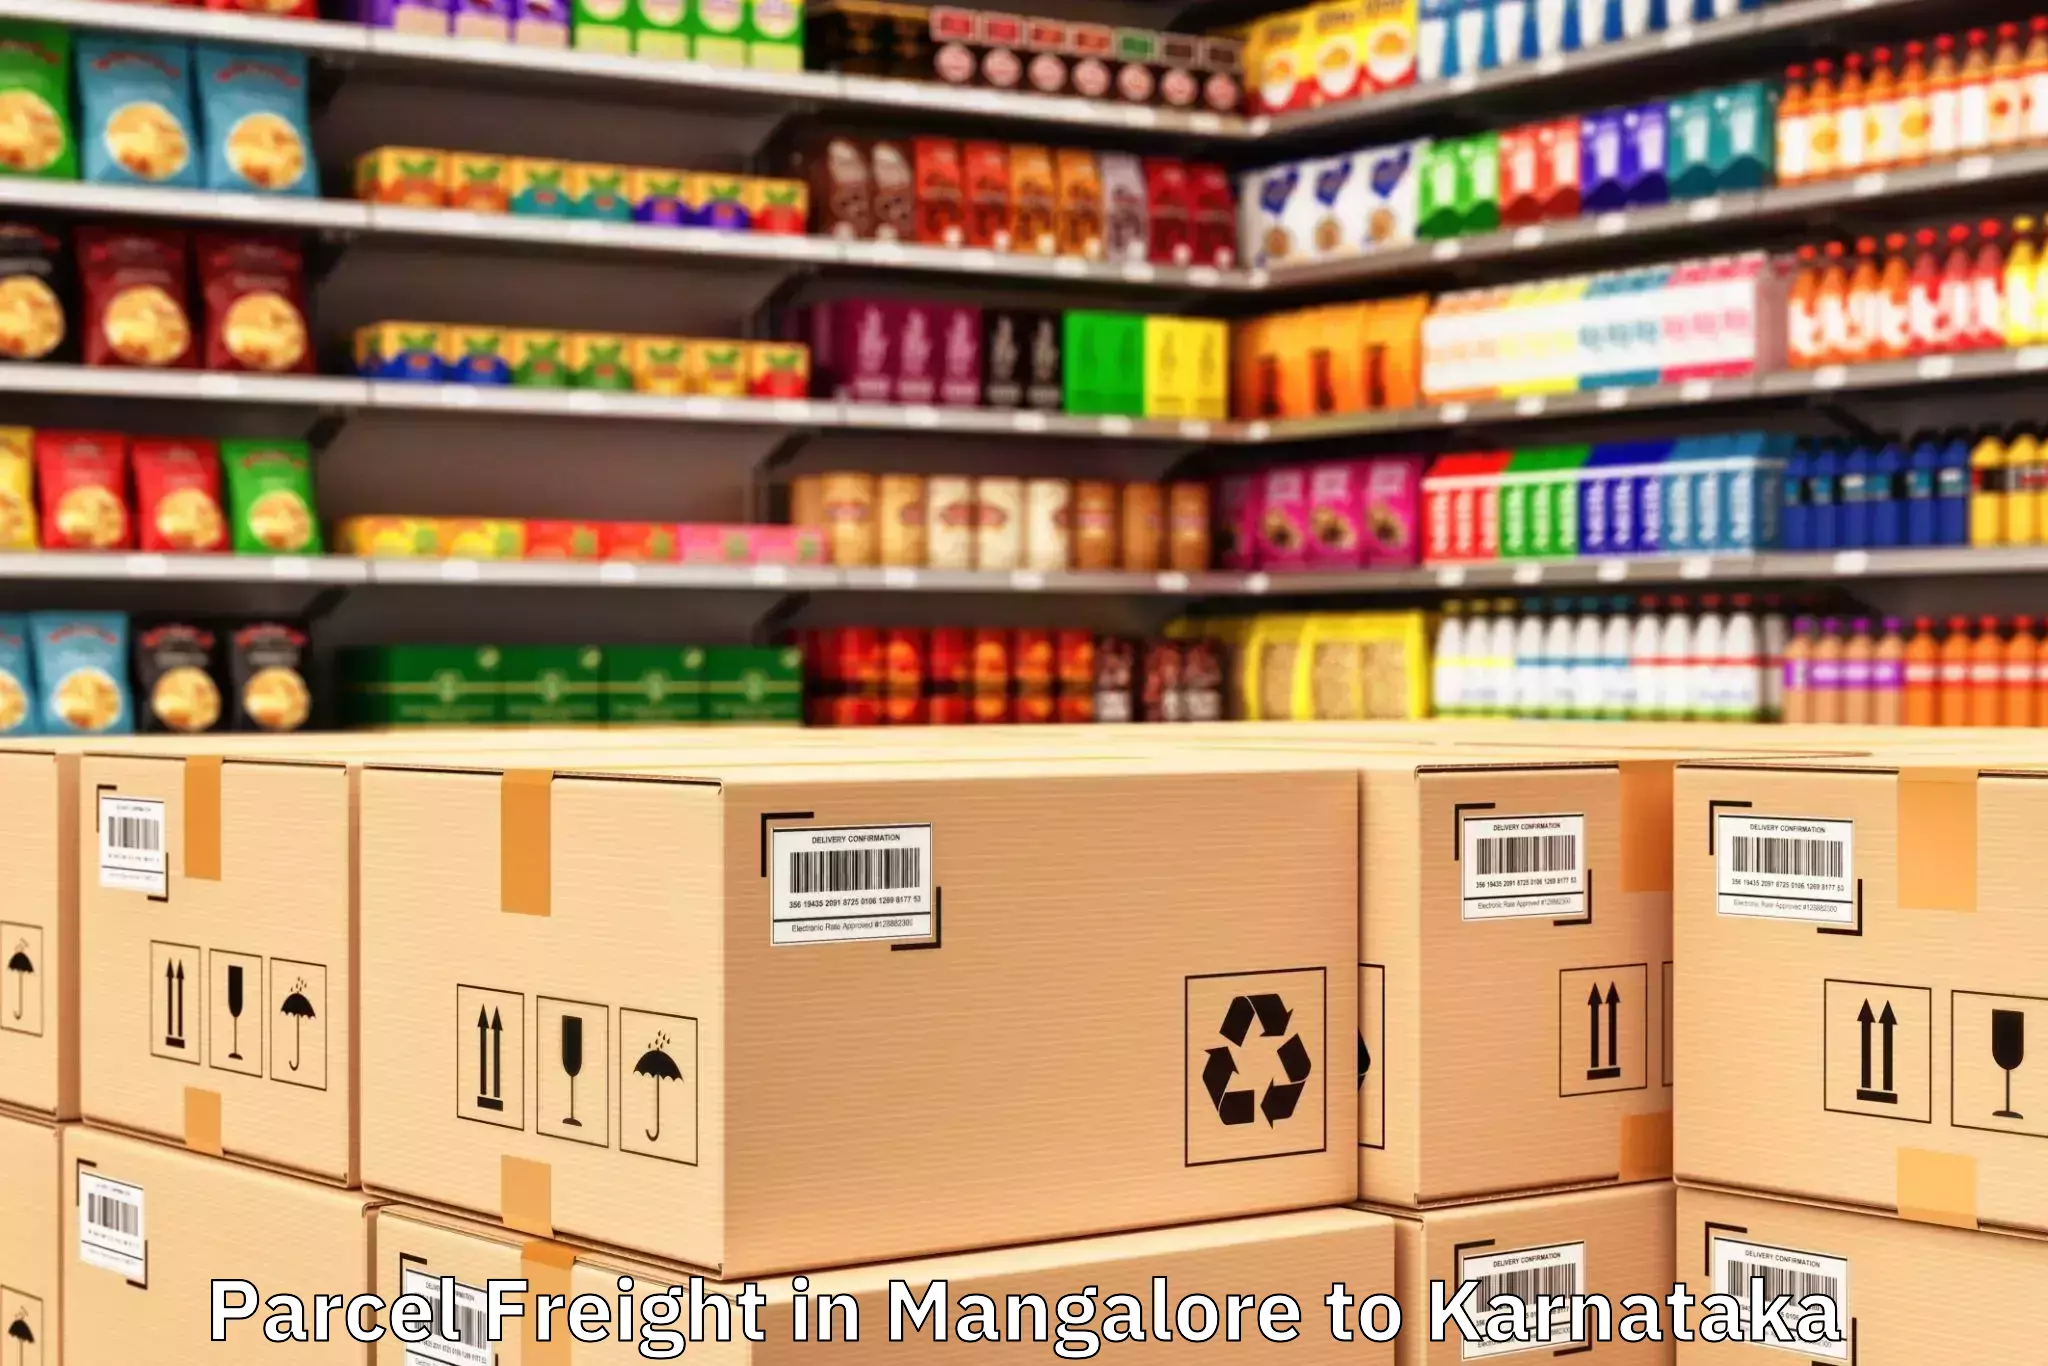 Get Mangalore to City Centre Mall Mangalore Parcel Freight